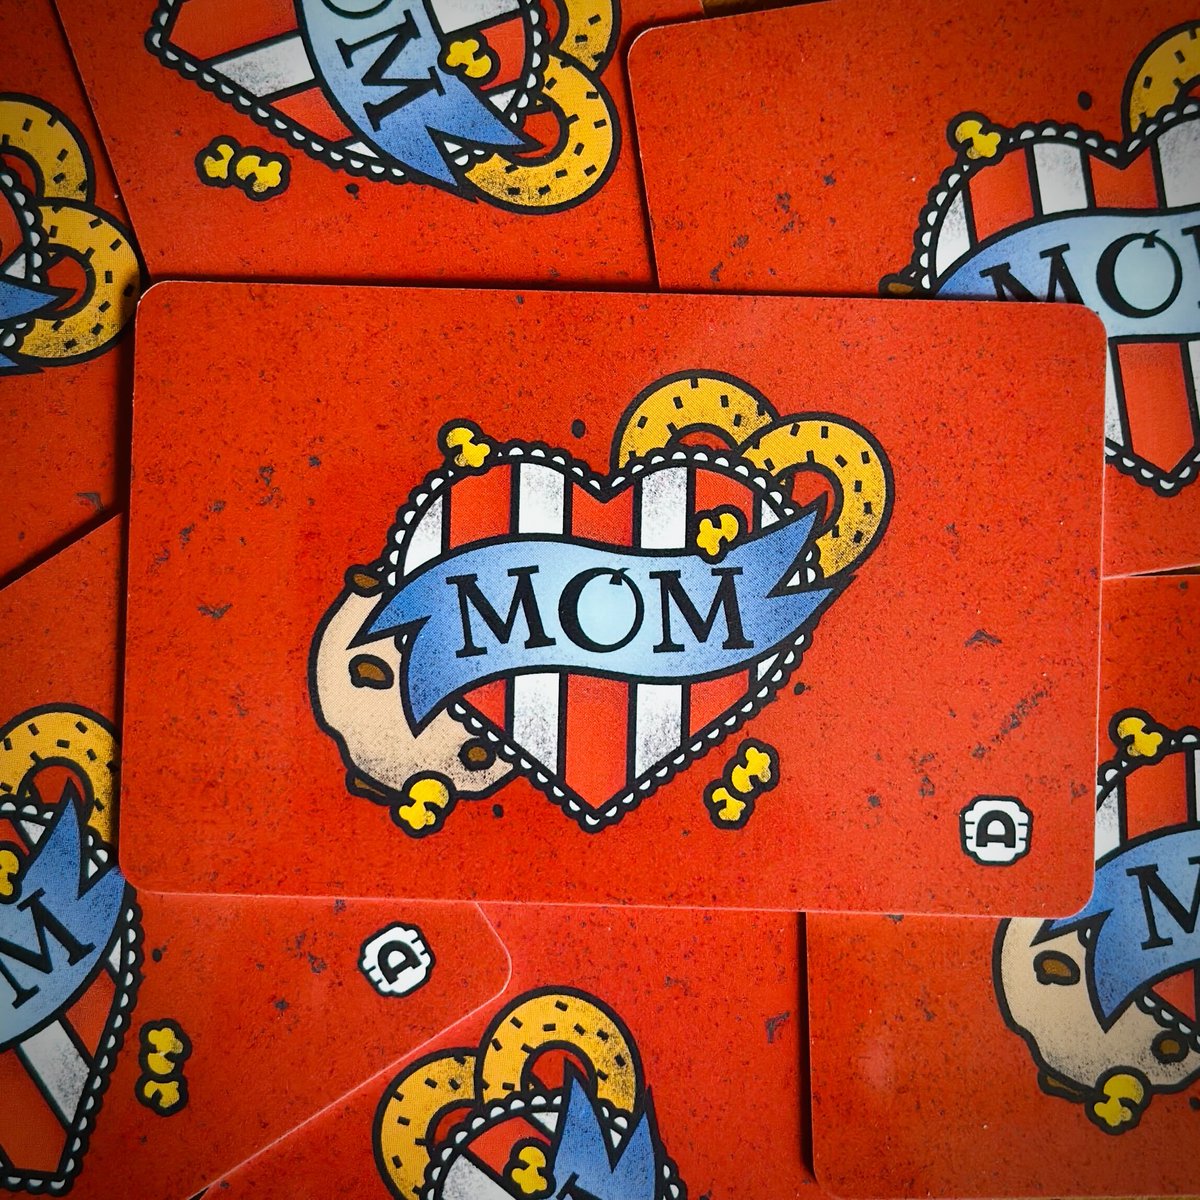 Your mom needs a gift, you need to save 20%, we’ve got you covered. Get 20% off all $50+ gift cards you buy online by 5/12 – that’s Mother’s Day, just FYI. Learn more here: drafthouse.com/gift-cards.